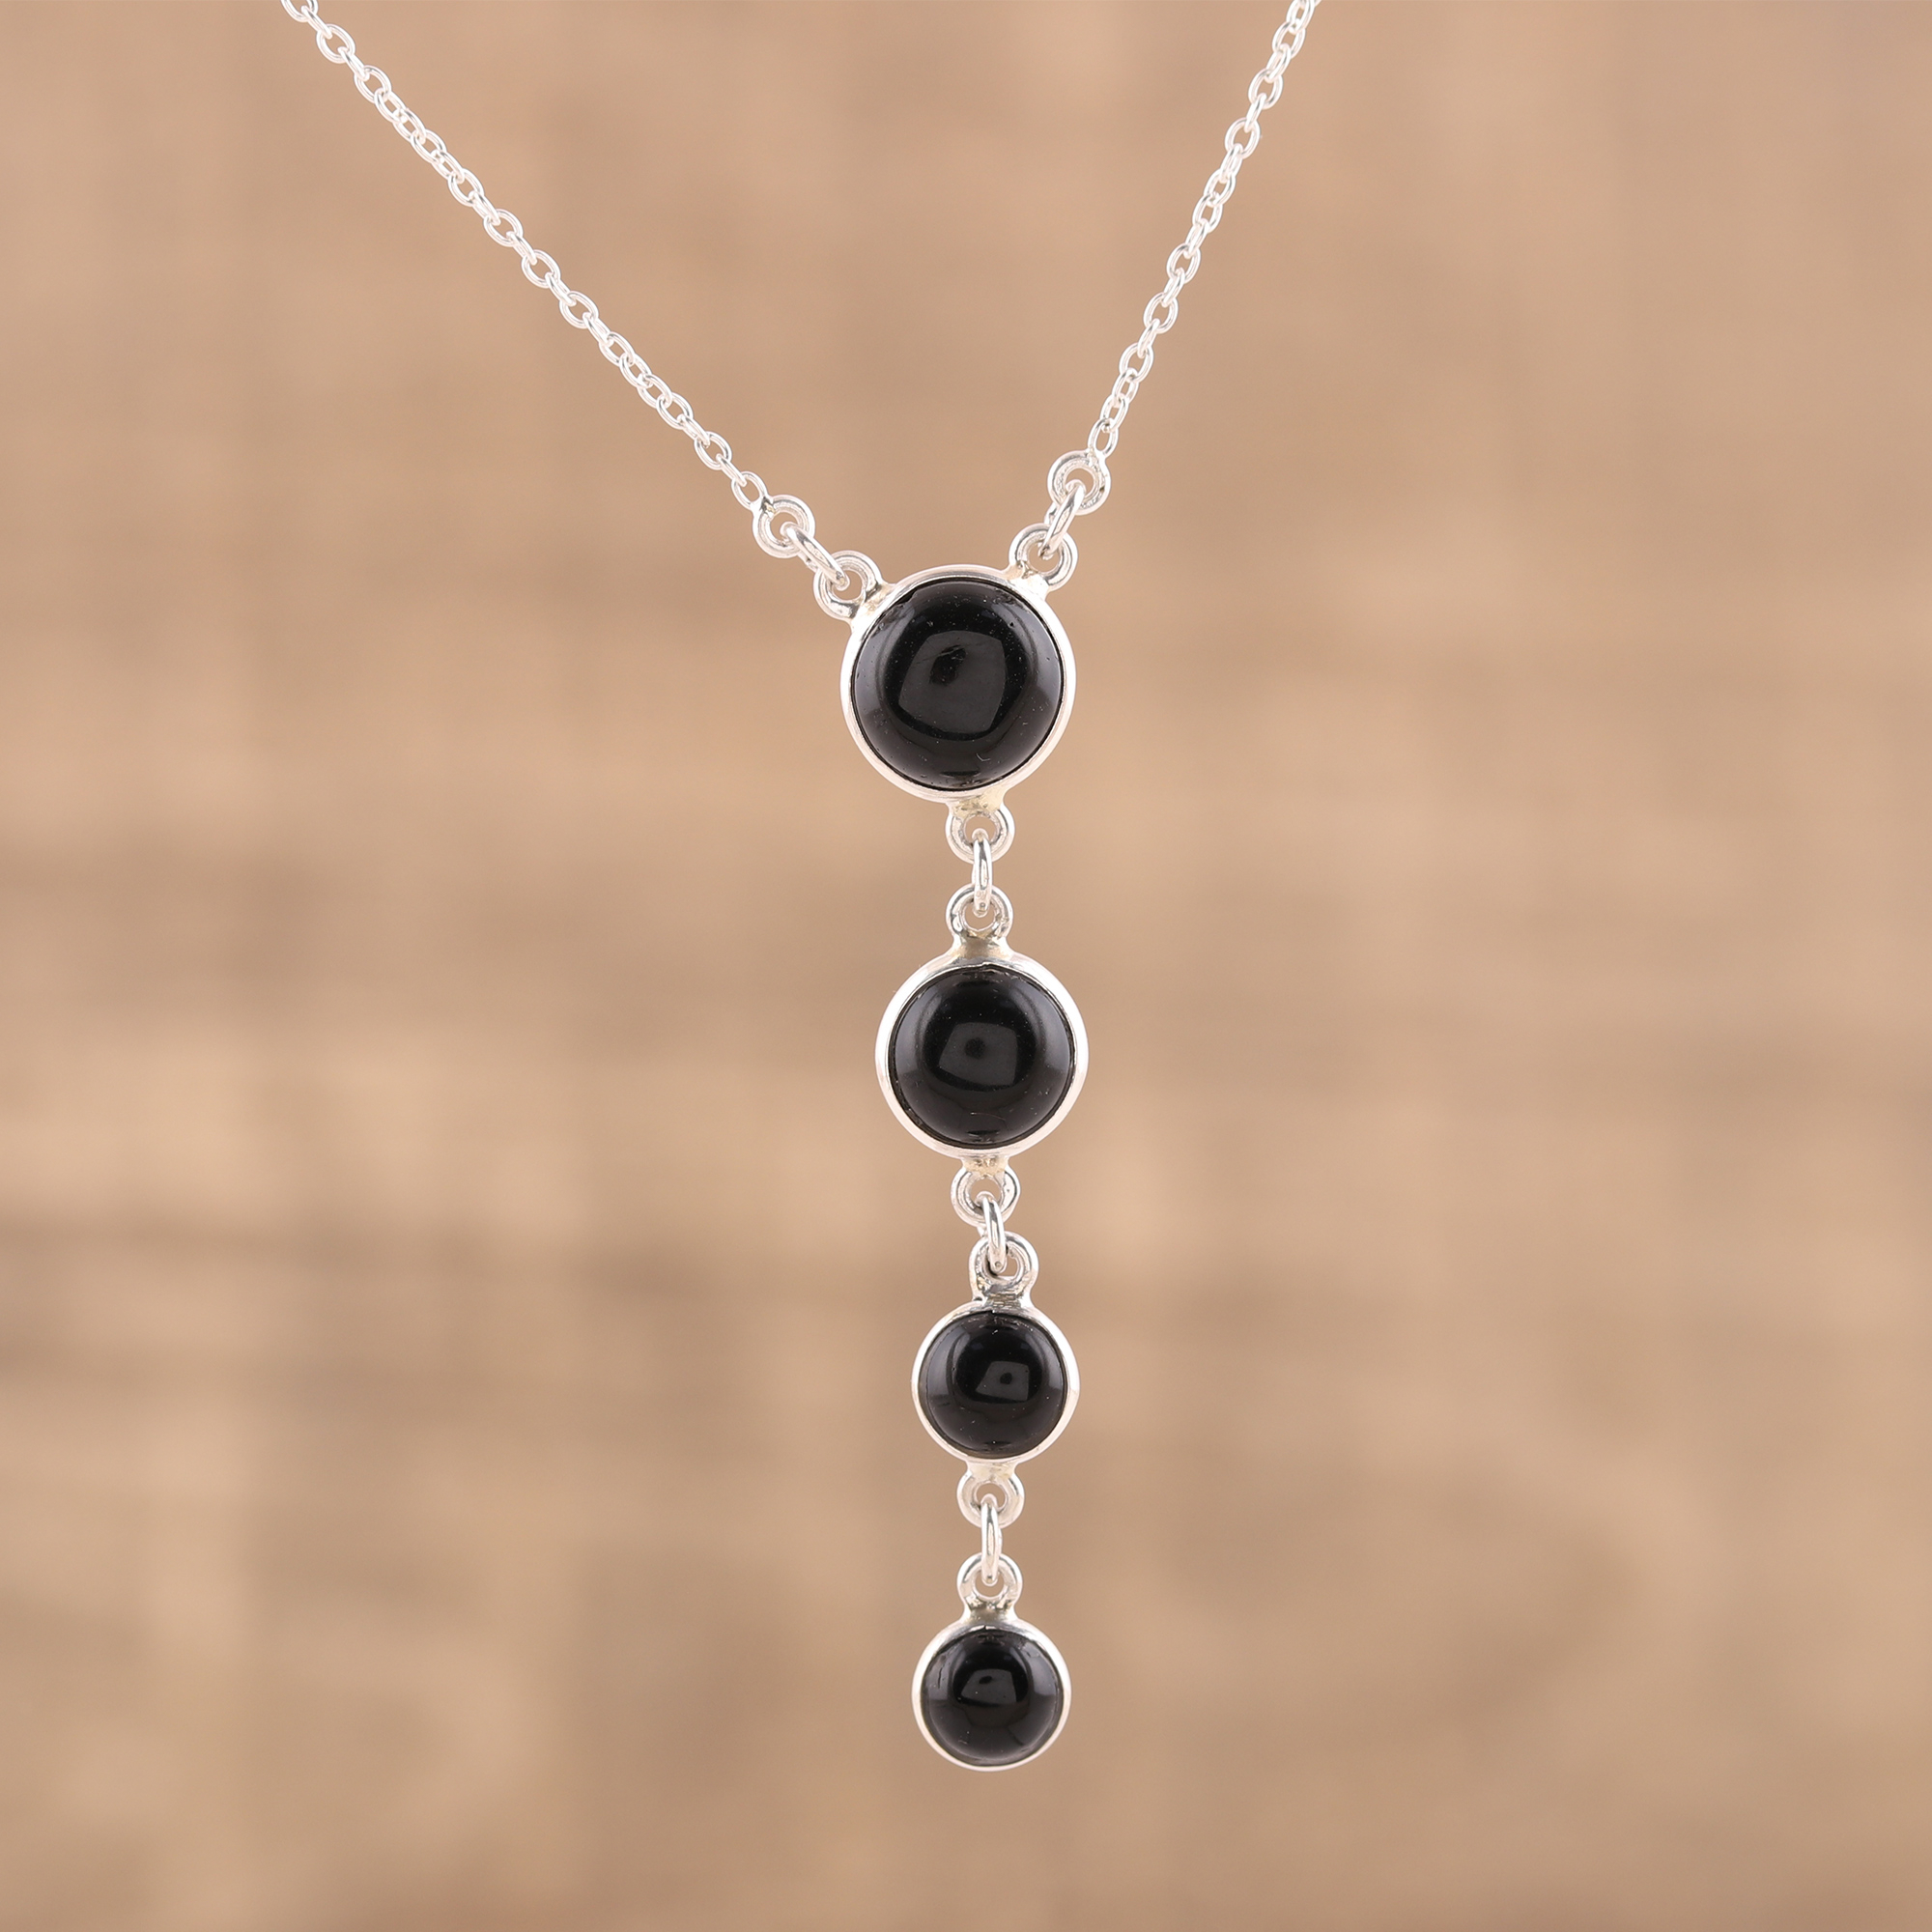 3 x Natural Chrystal Quartzs and Citrine Indian Design Beautiful 925 Sterling Silver Pendant with 100% Natural Black Onyx Cabochon